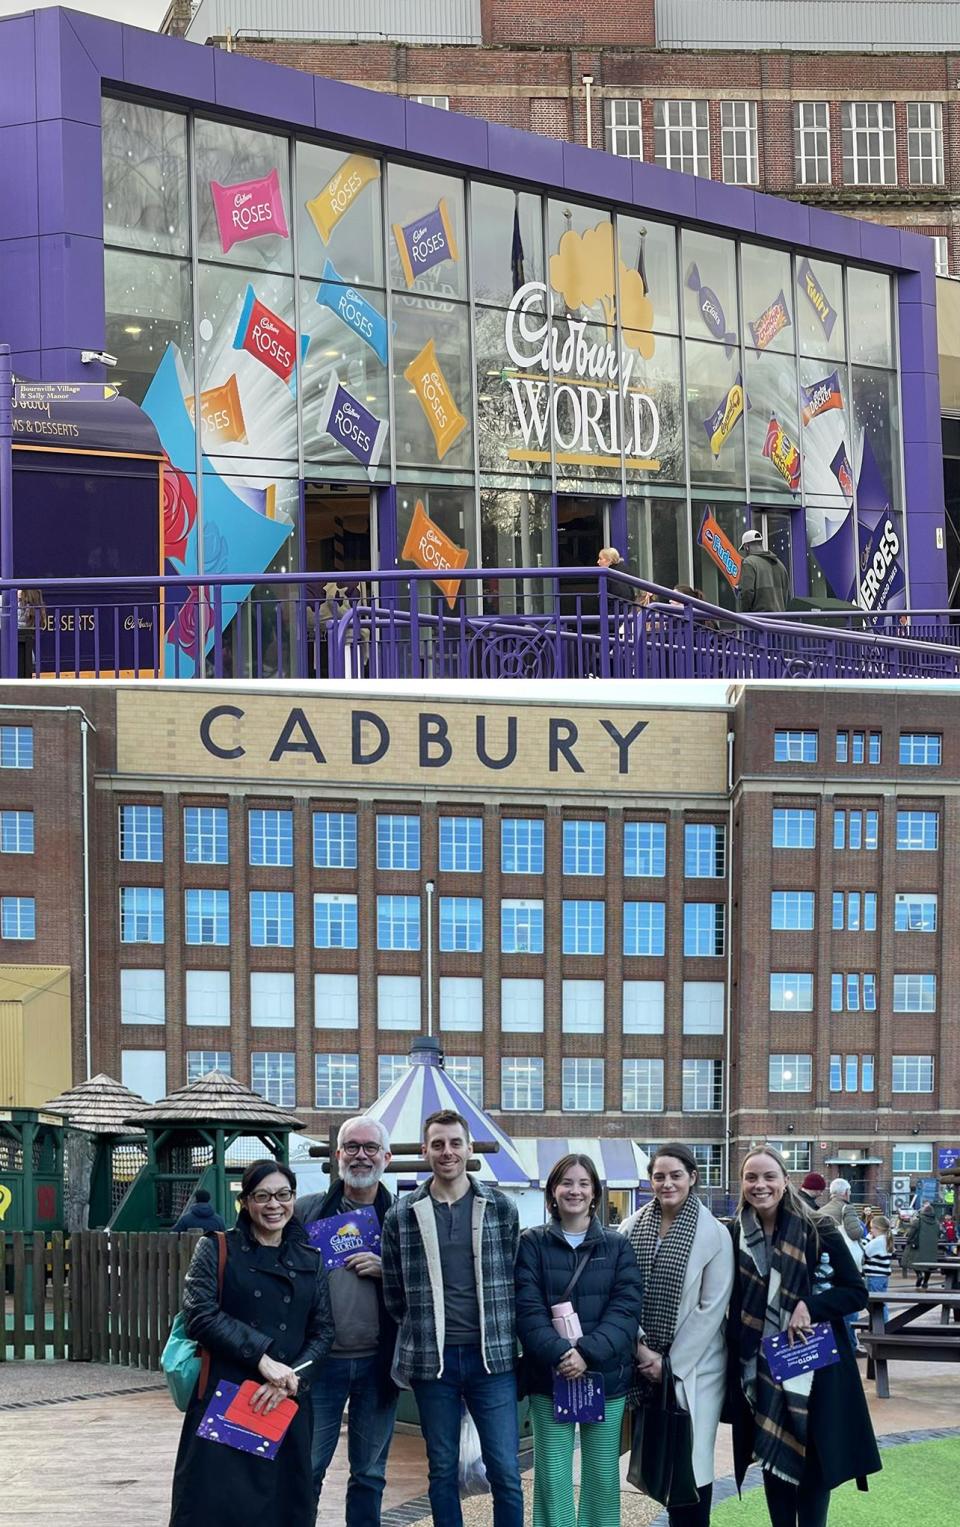 Group of visitors standing in front of the Cadbury World entrance, smiling